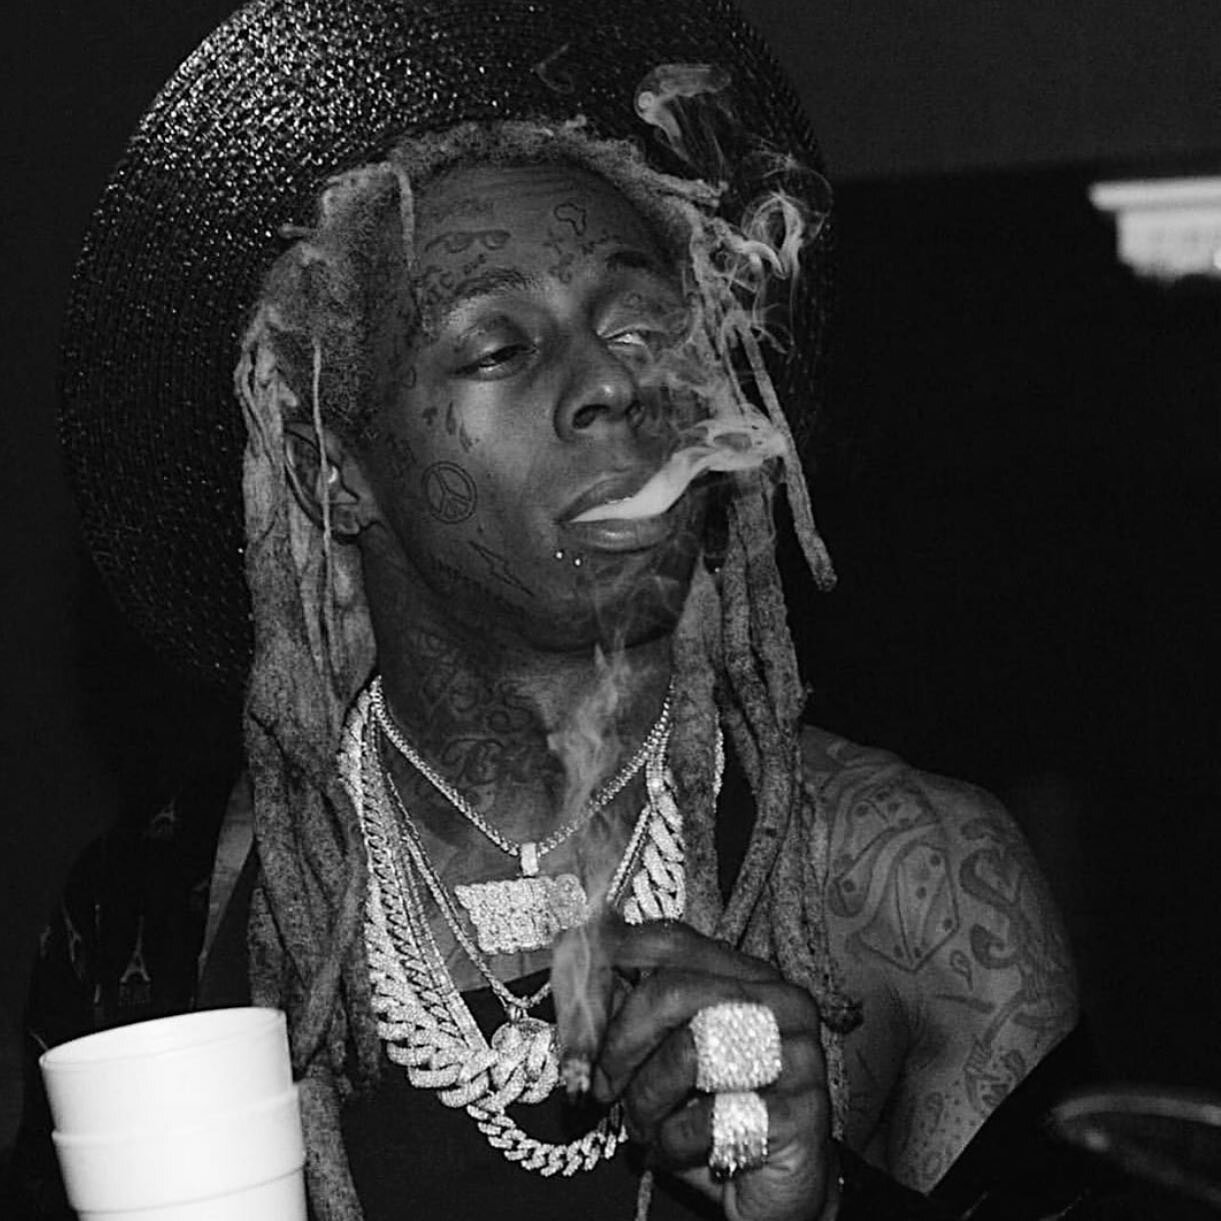 Happy Birthday To The Greatest Of All Time.... Weezy

🖤 𝖞𝖓𝖌